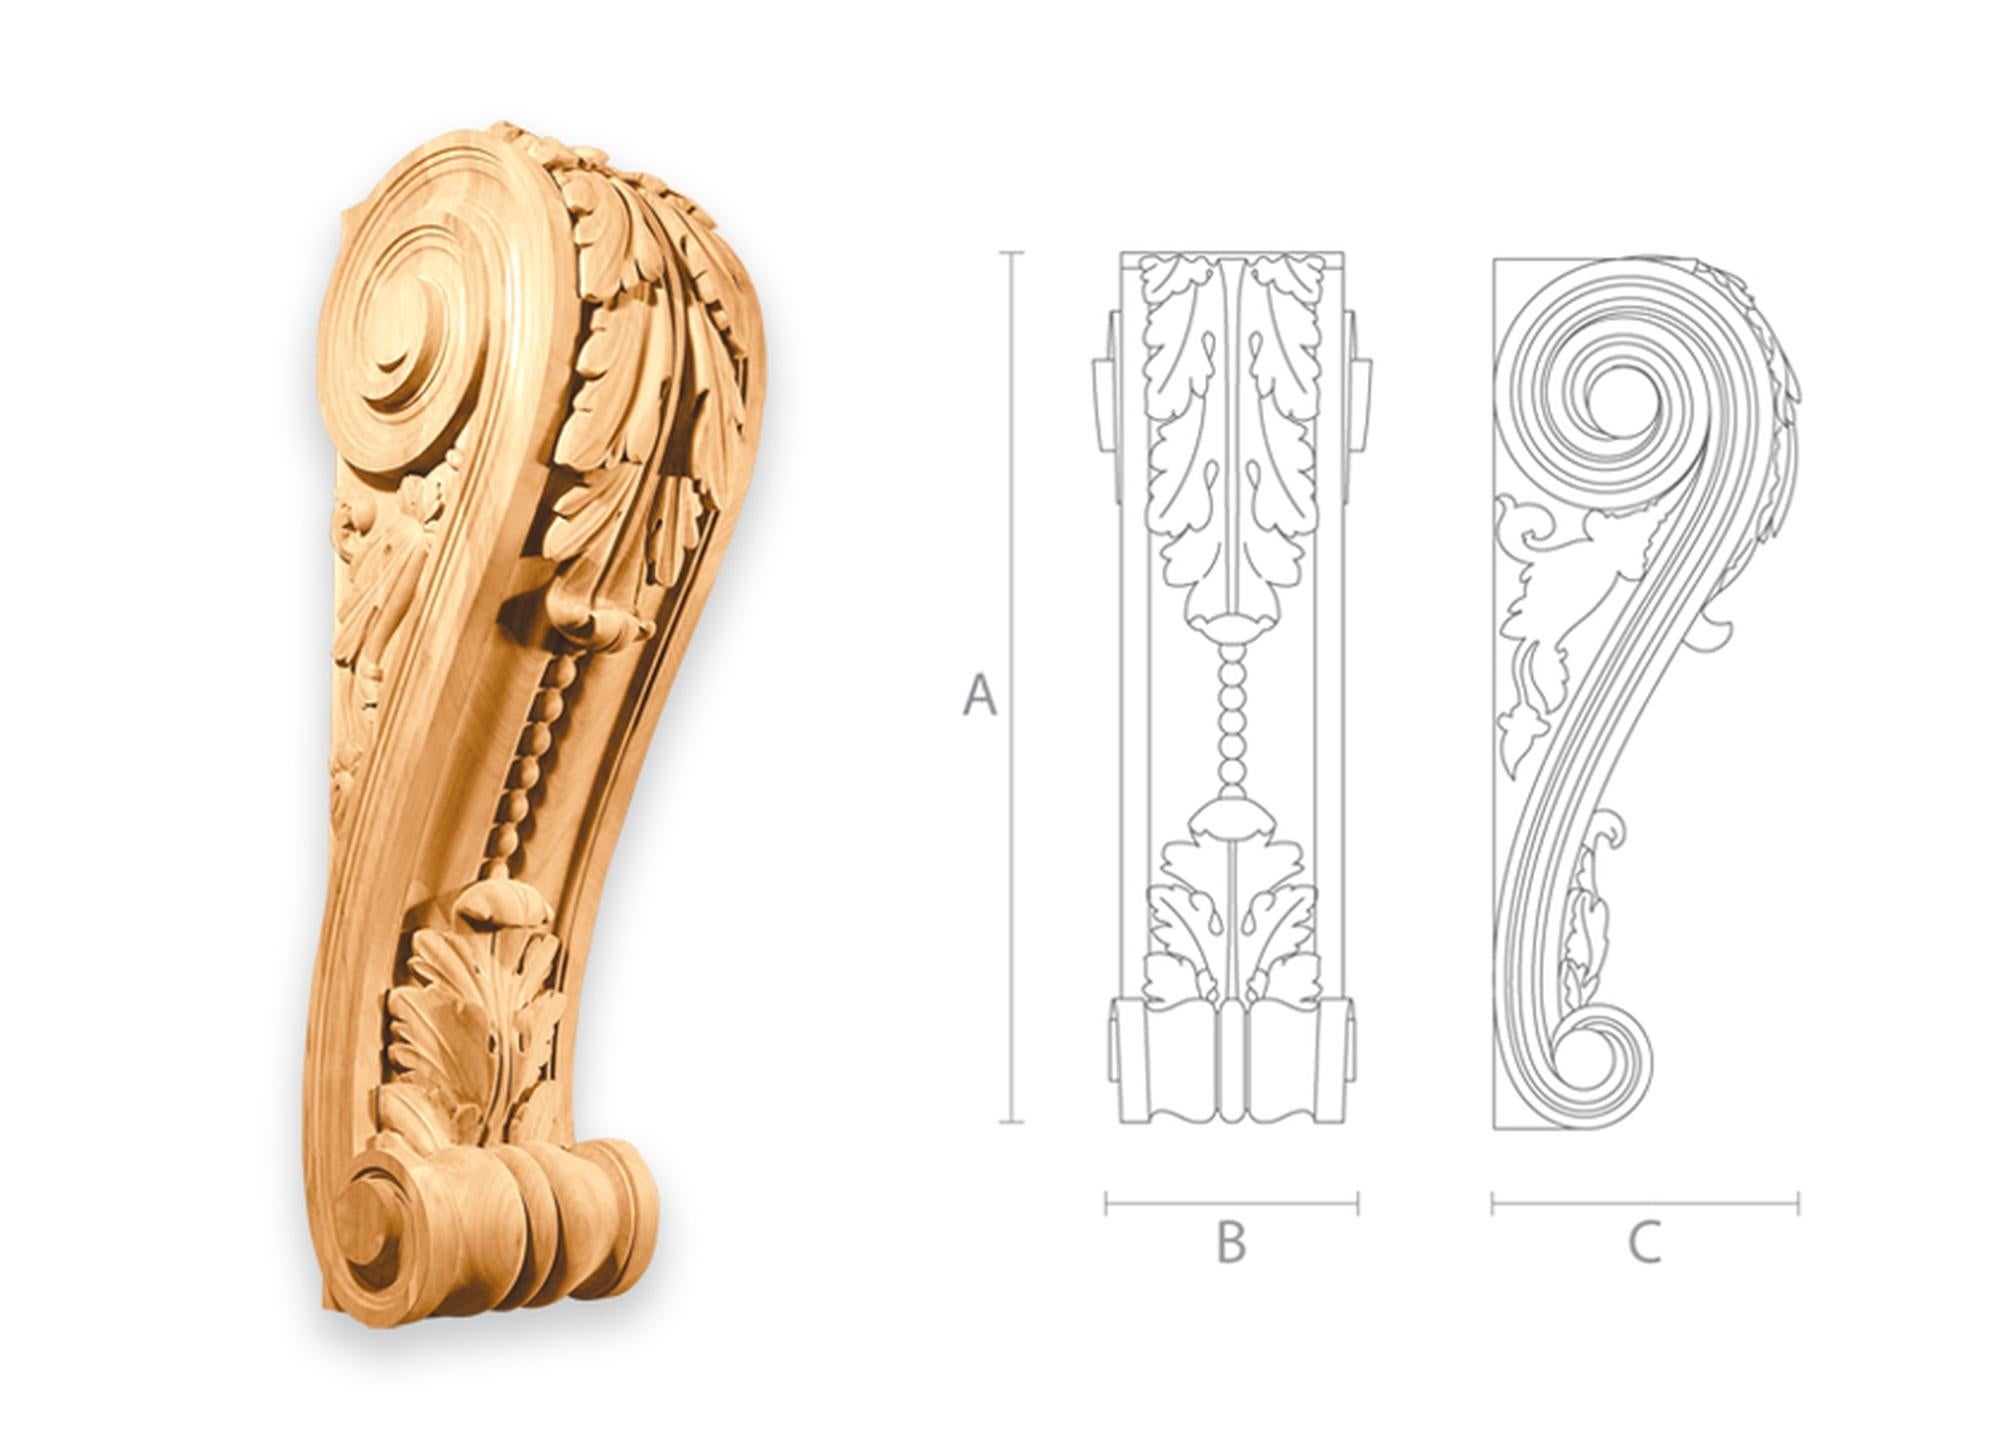 High-quality unfinished carved wooden corbel. Unpainted.

>> SKU: KR-018

>> Dimensions (A x B x C x d x e x f):

1) 10.2